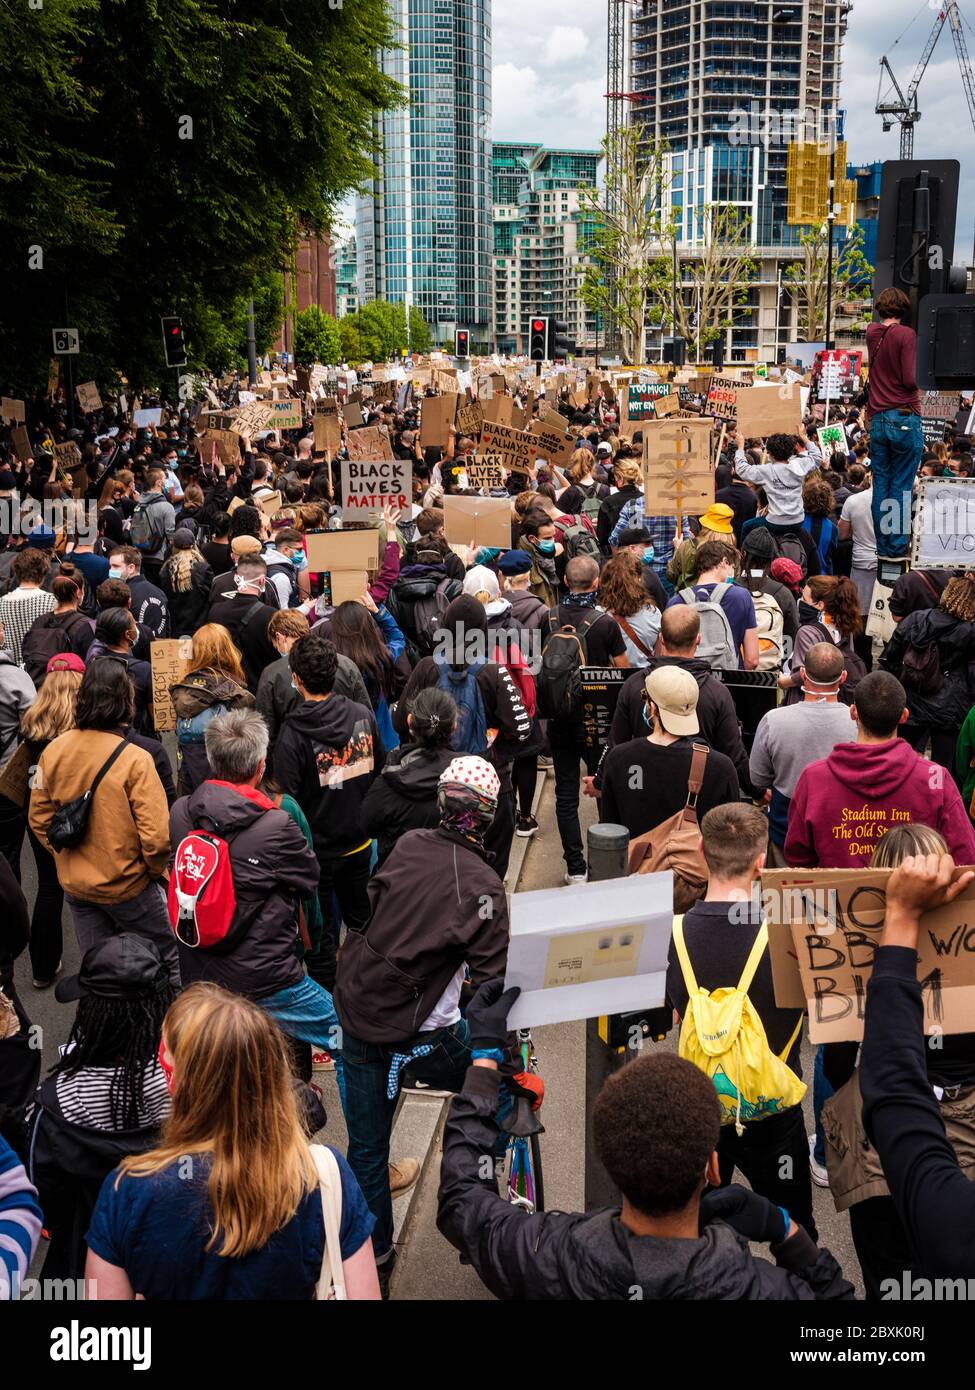 London, UK. 7th June, 2020. Black Lives Matter Protest outside the U.S. Embassy in London. In memory of George Floyd who was killed on the 25th May while in police custody in the US city of Minneapolis. Credit: Yousef Al Nasser Stock Photo